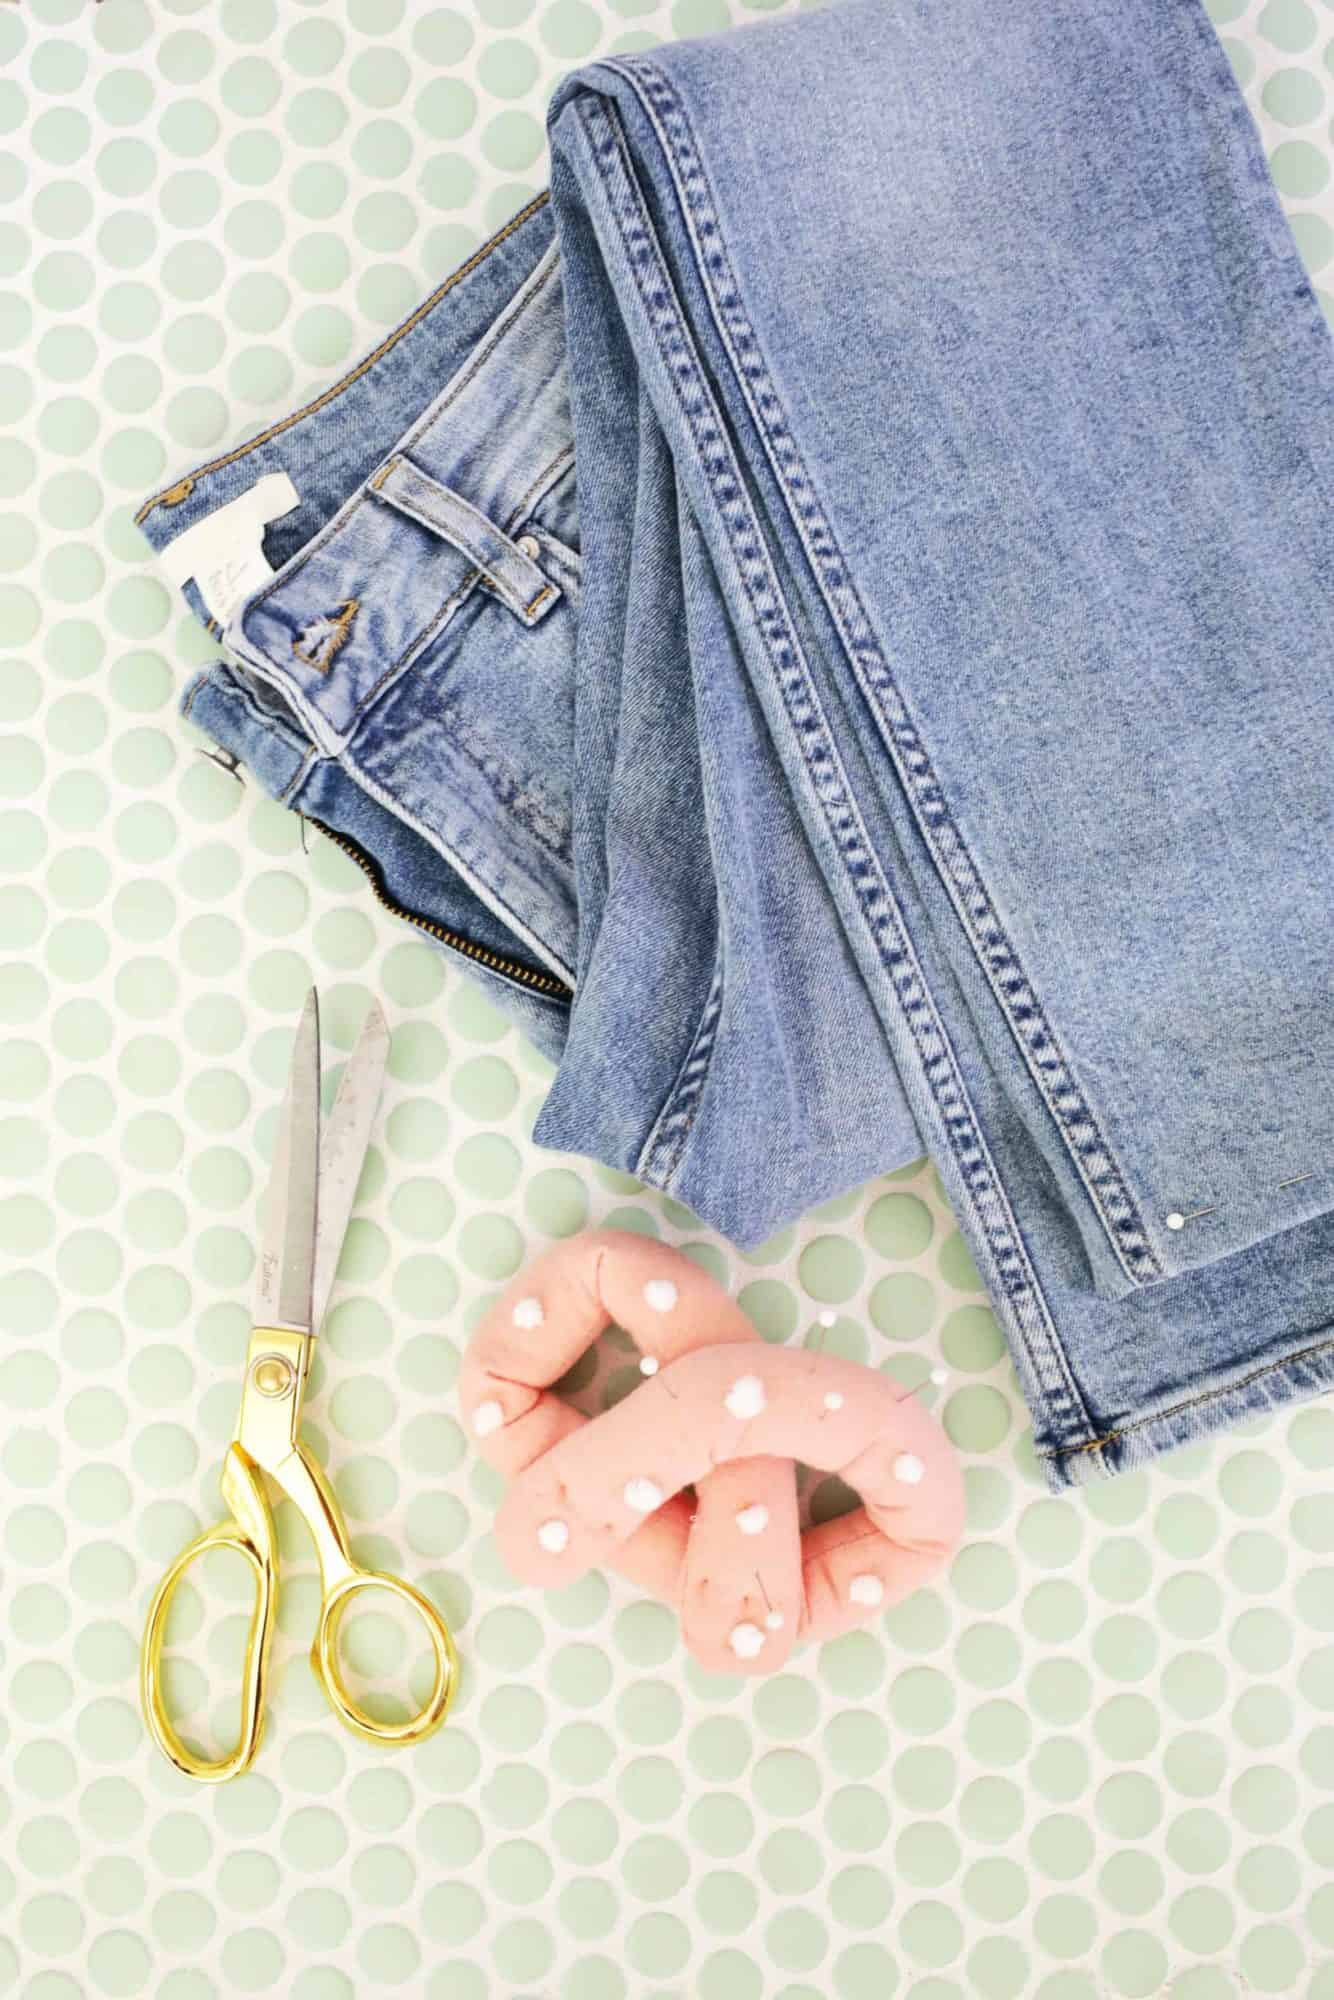 DIY: How to Raw Hem Your Jeans